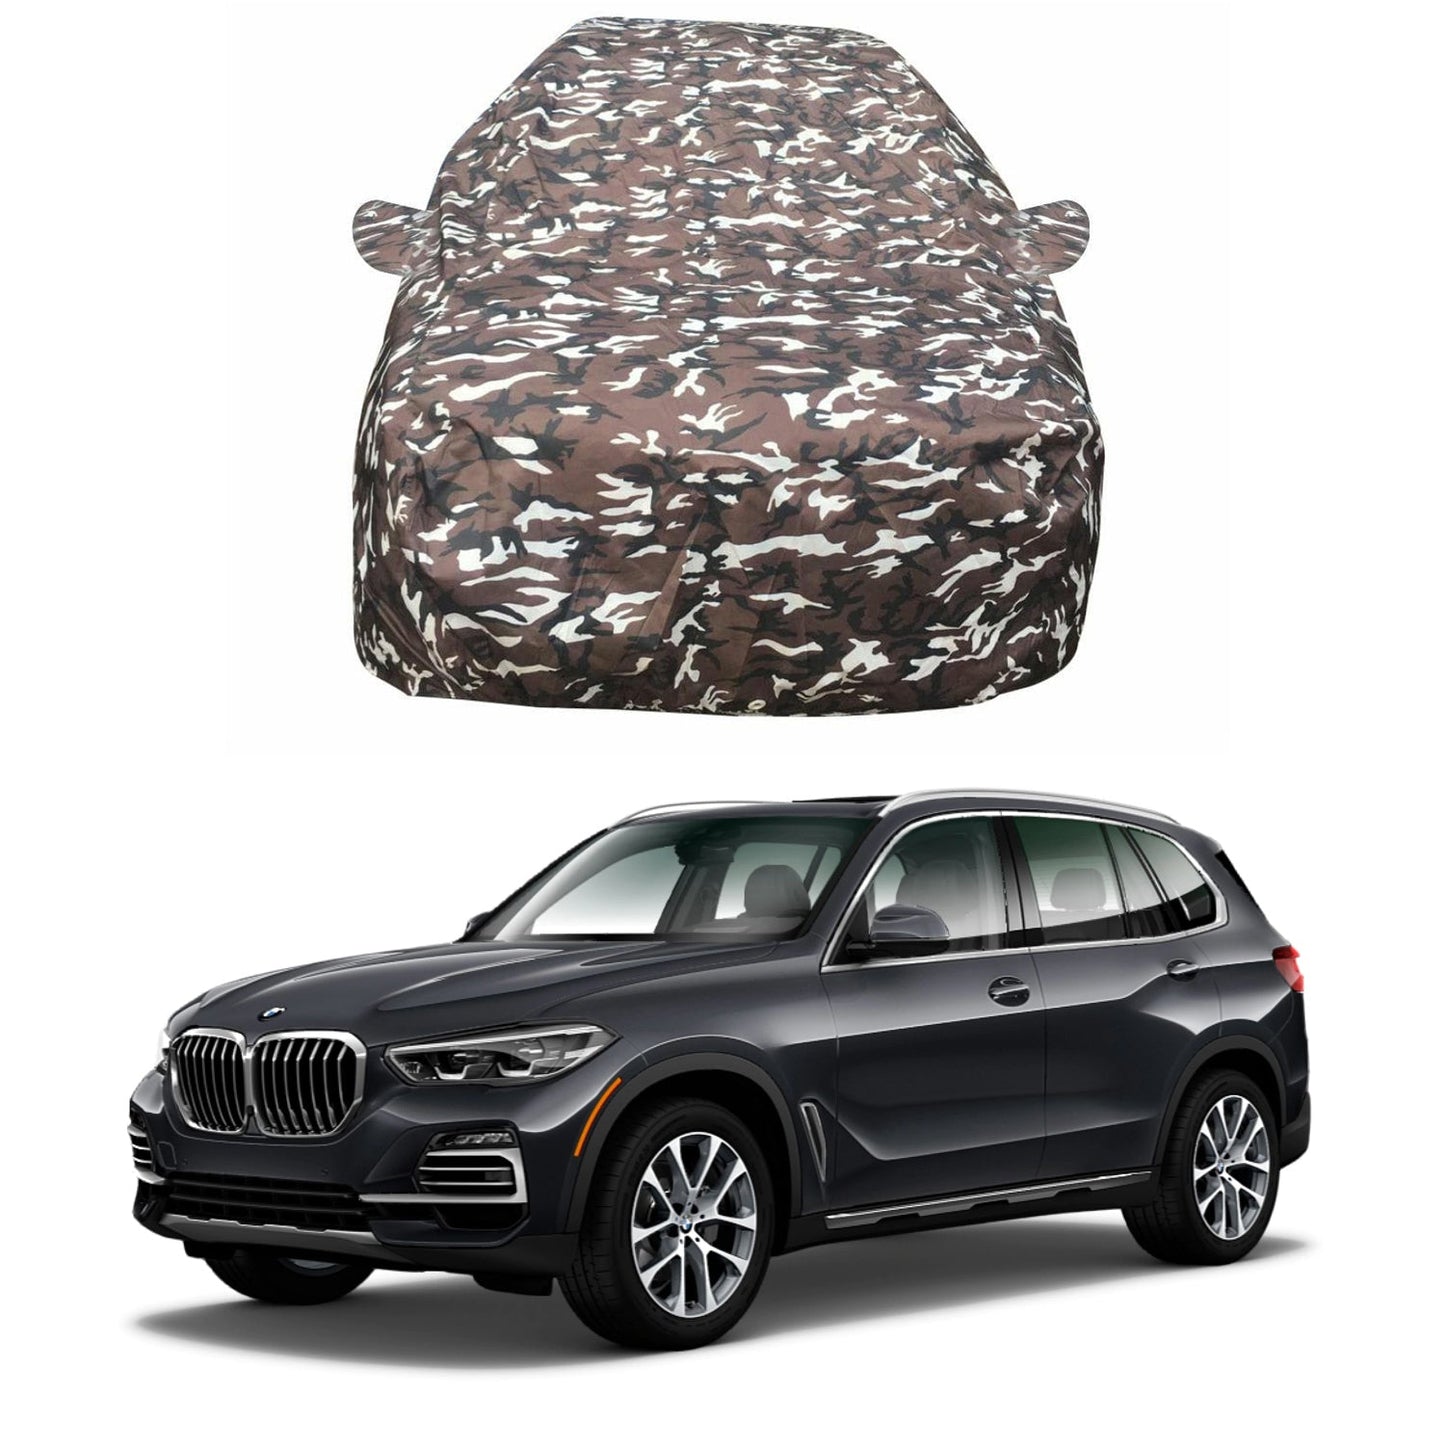 Oshotto Ranger Design Made of 100% Waterproof Fabric Multicolor Car Body Cover with Mirror Pockets For BMW X5 (2015-2019)